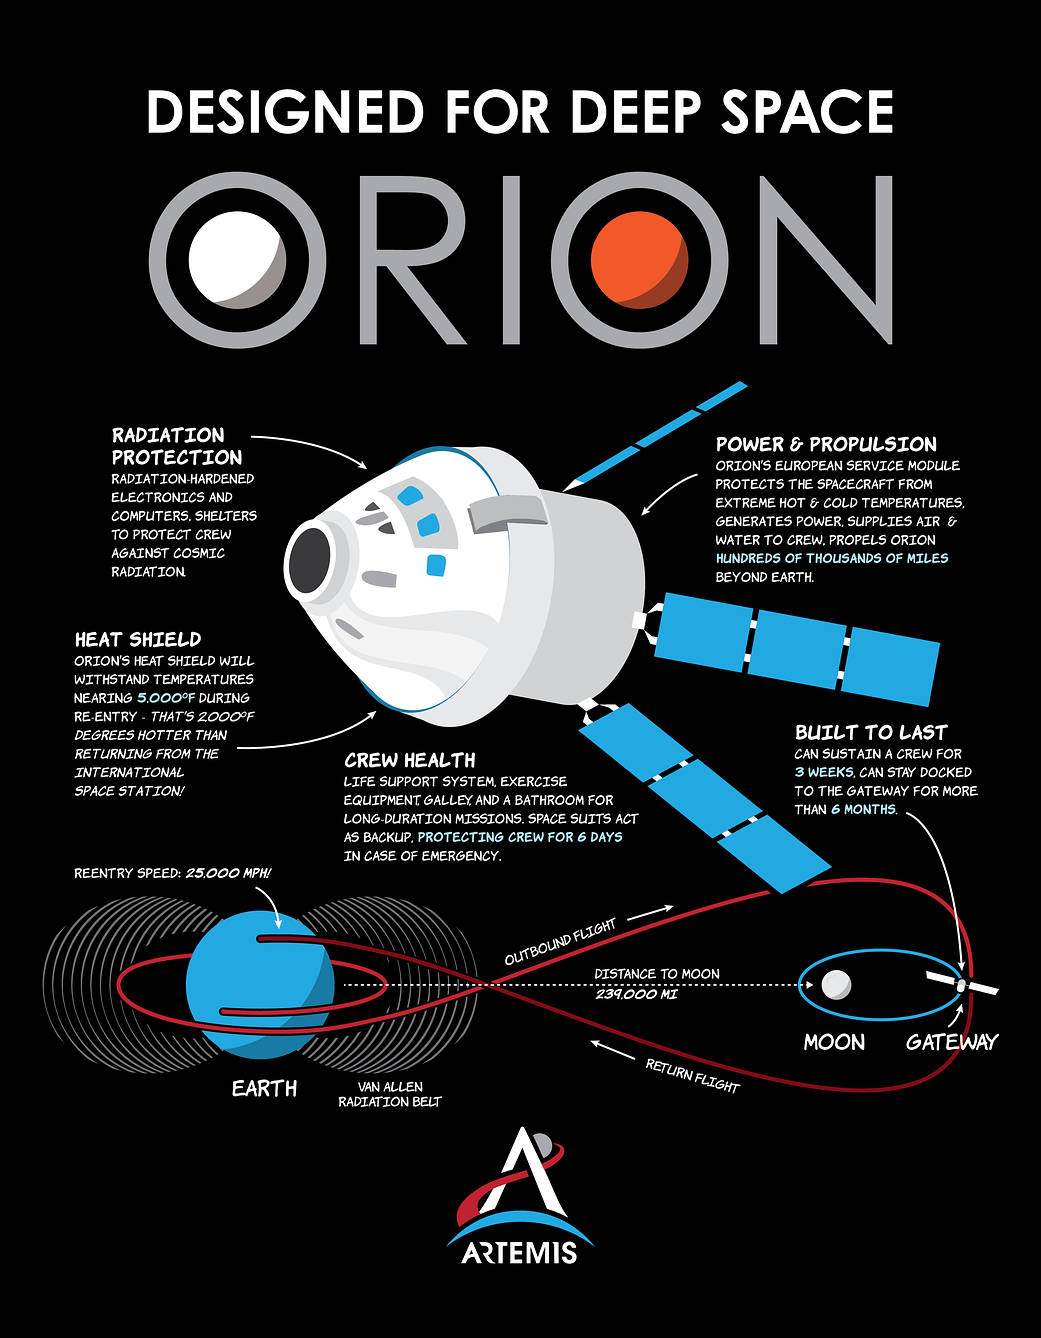 Orion Capabilities for Deep Space Enable Crewed Artemis Moon Missions